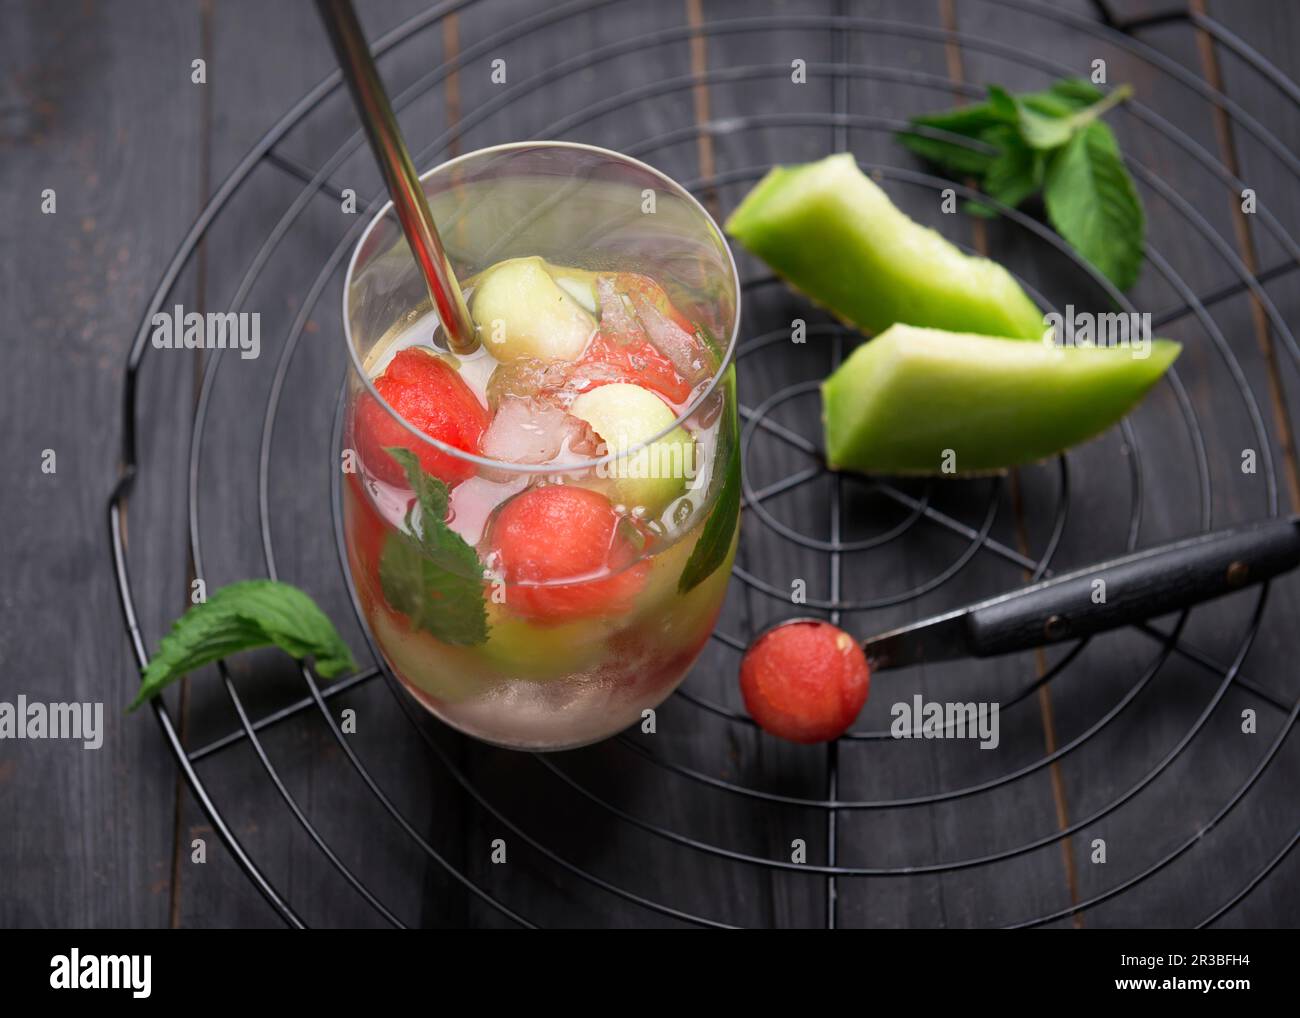 Fizzy white wine Sangria with watermelon and melon balls Stock Photo